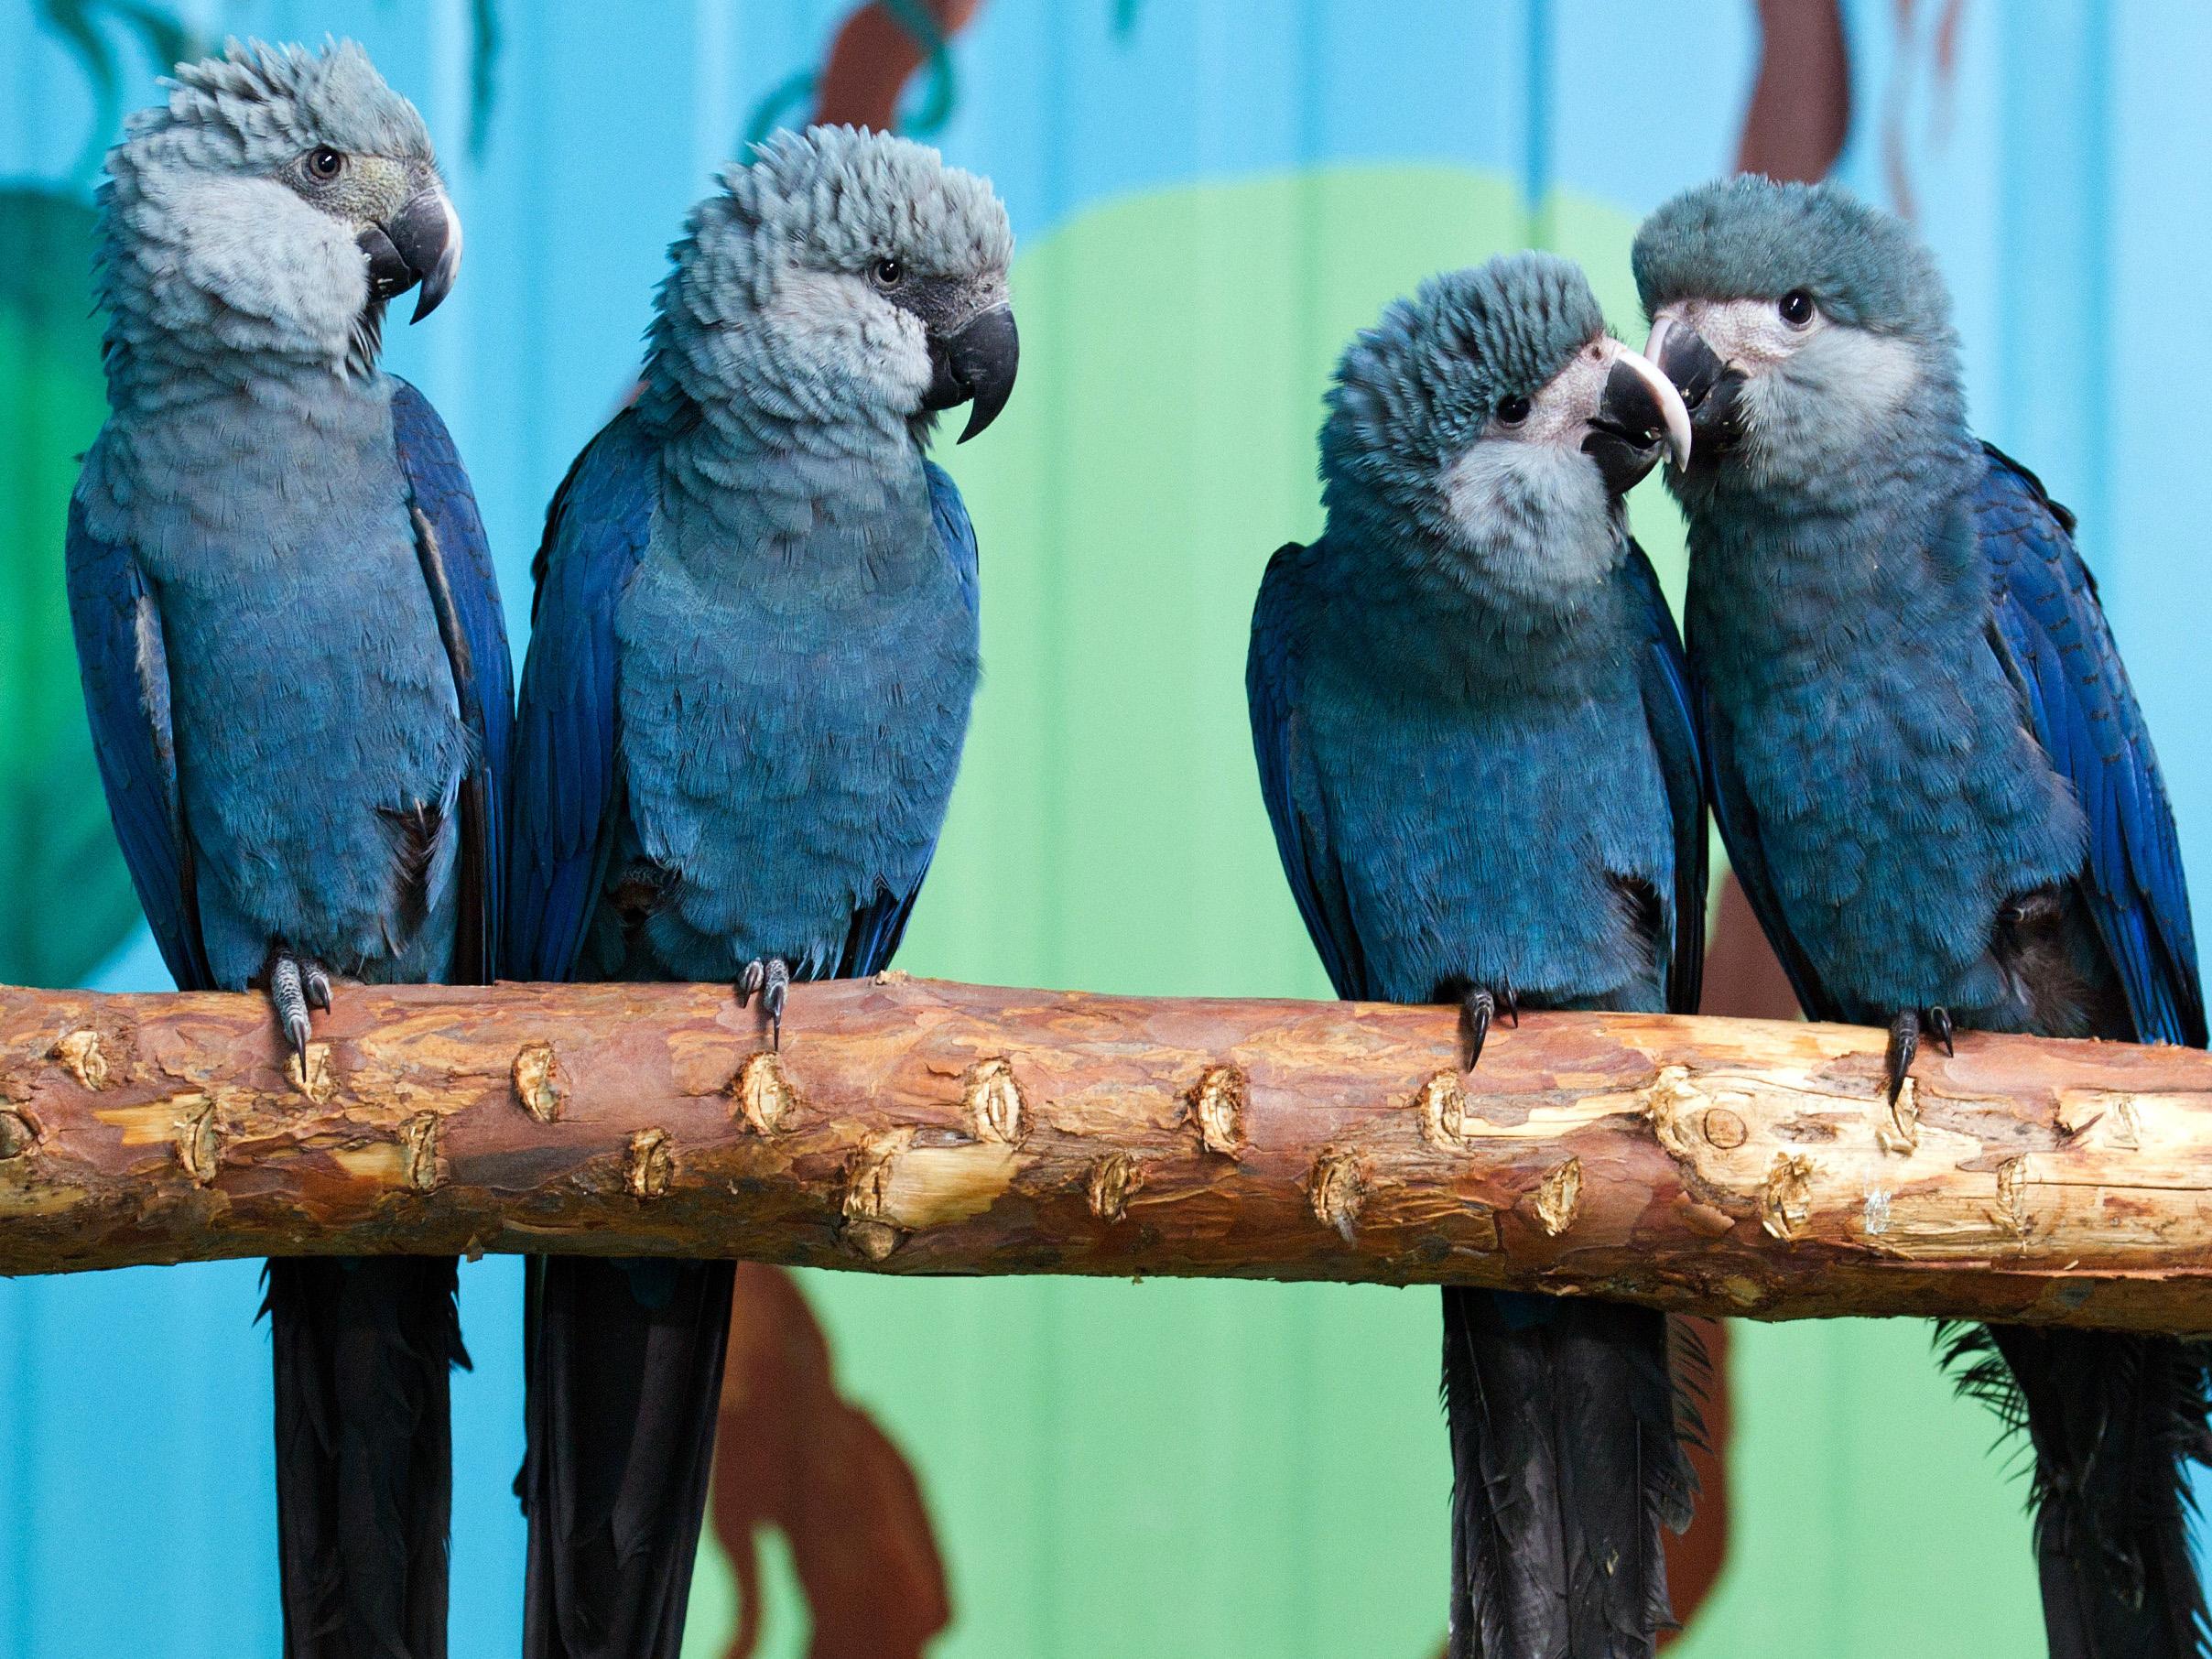 Spix's macaw has been entirely extinct in the wild since the start of the century